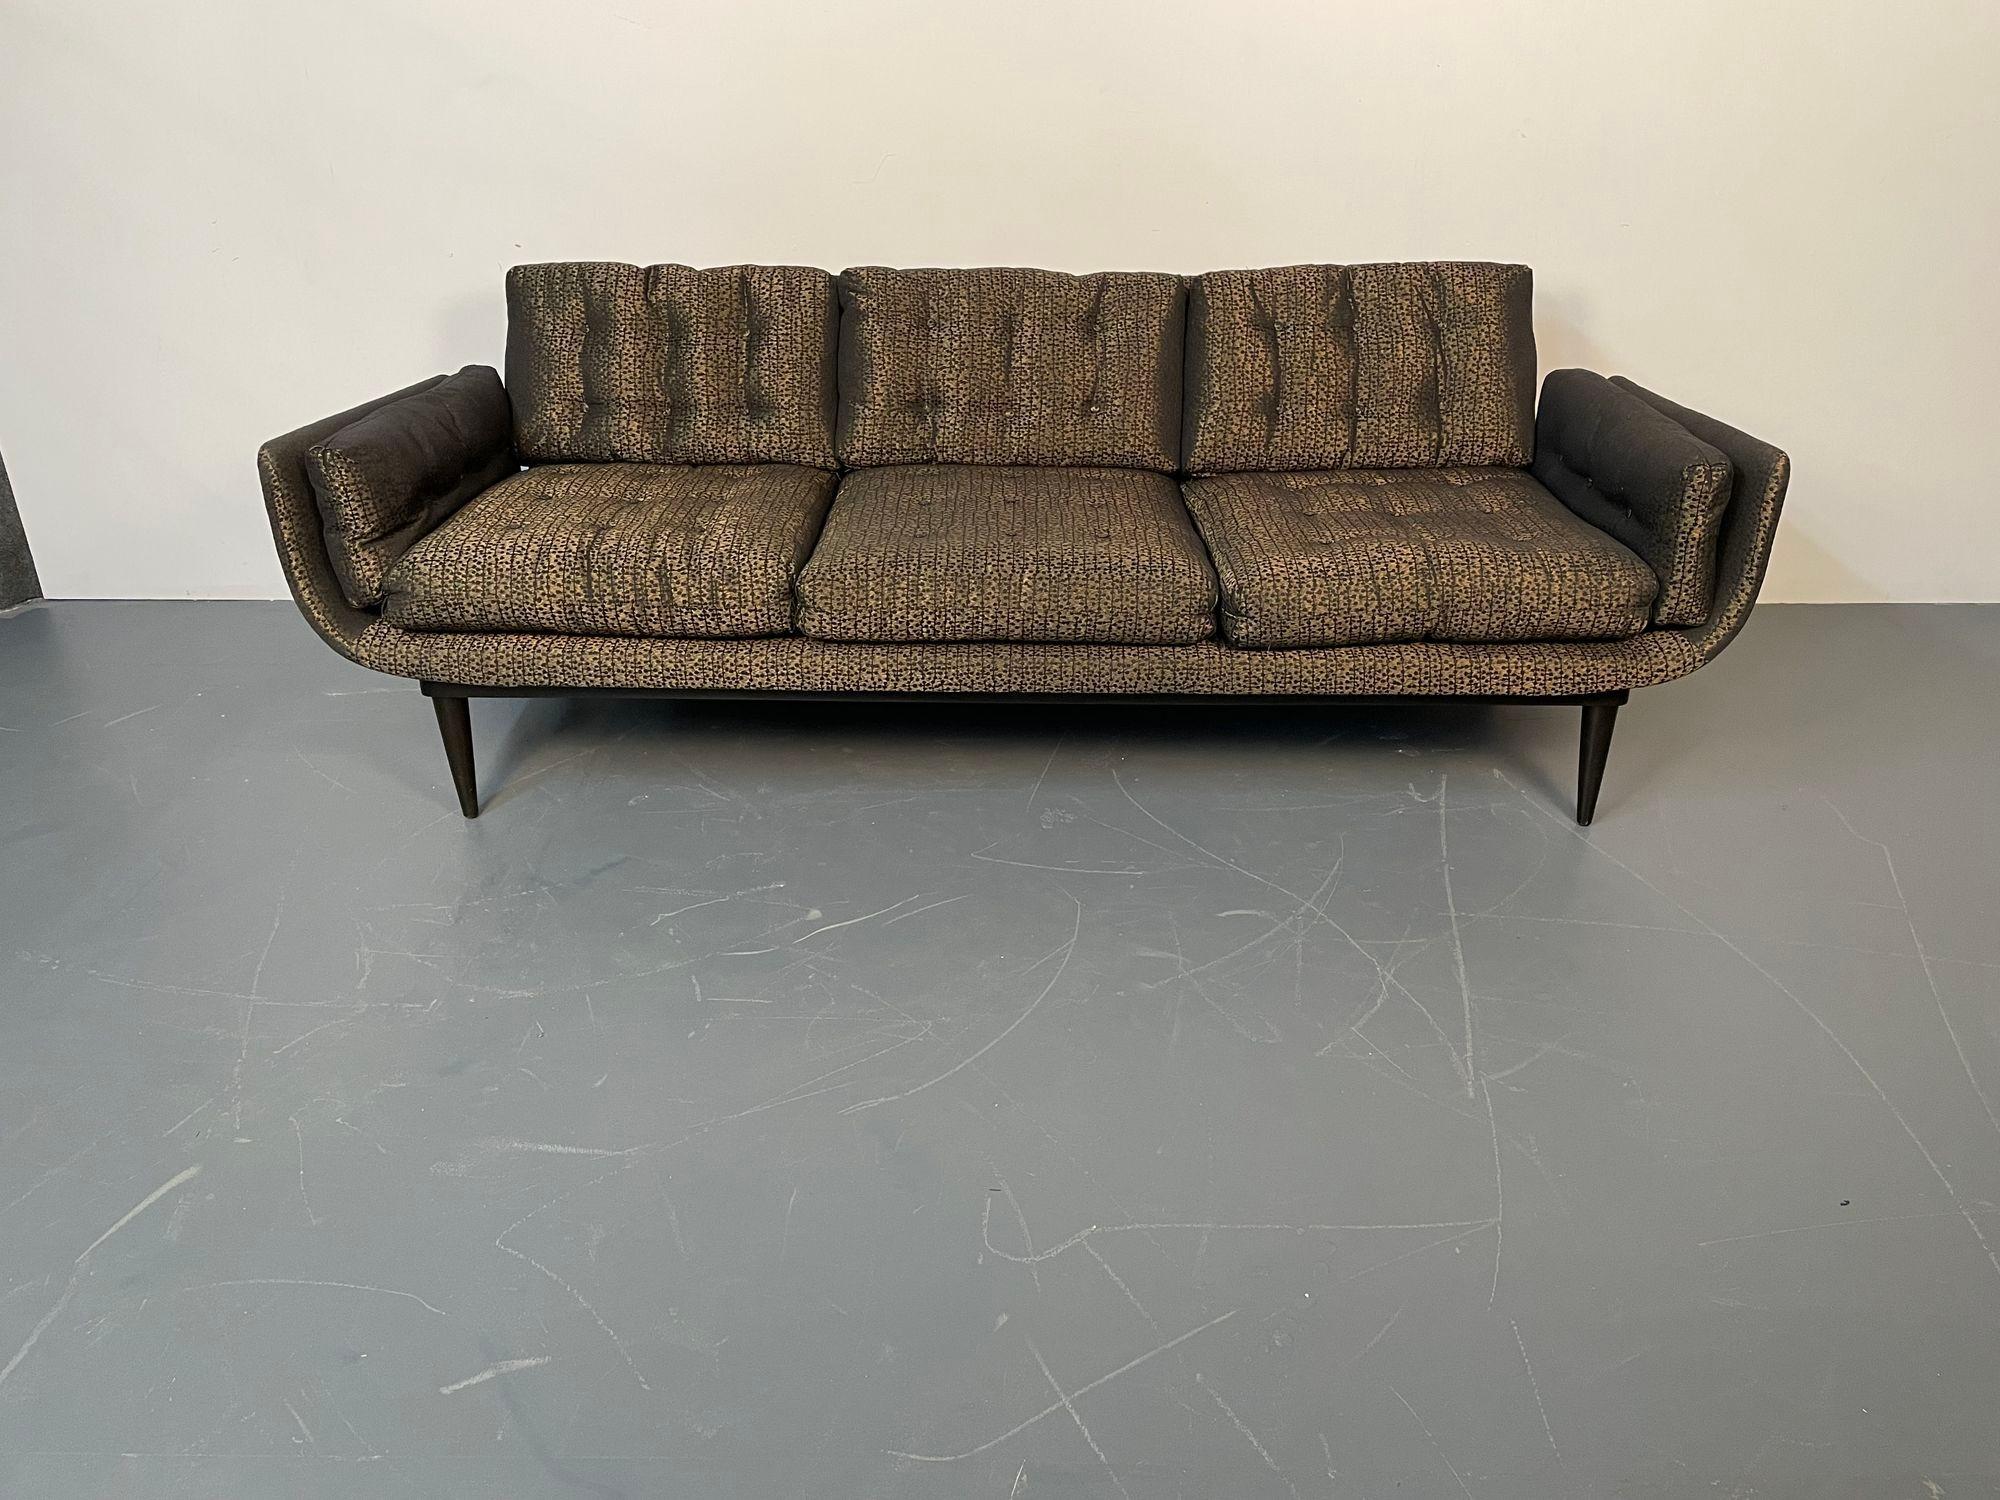 Mid-Century Modern Curved Sofa / Settee, Adrian Pearsall Style, Three-Seater
 
Curvaceous three seater mid-century modern sofa in the manner of American designer, Adrian Pearsall. Having removable cushions and backrests. Banana form In a lovely